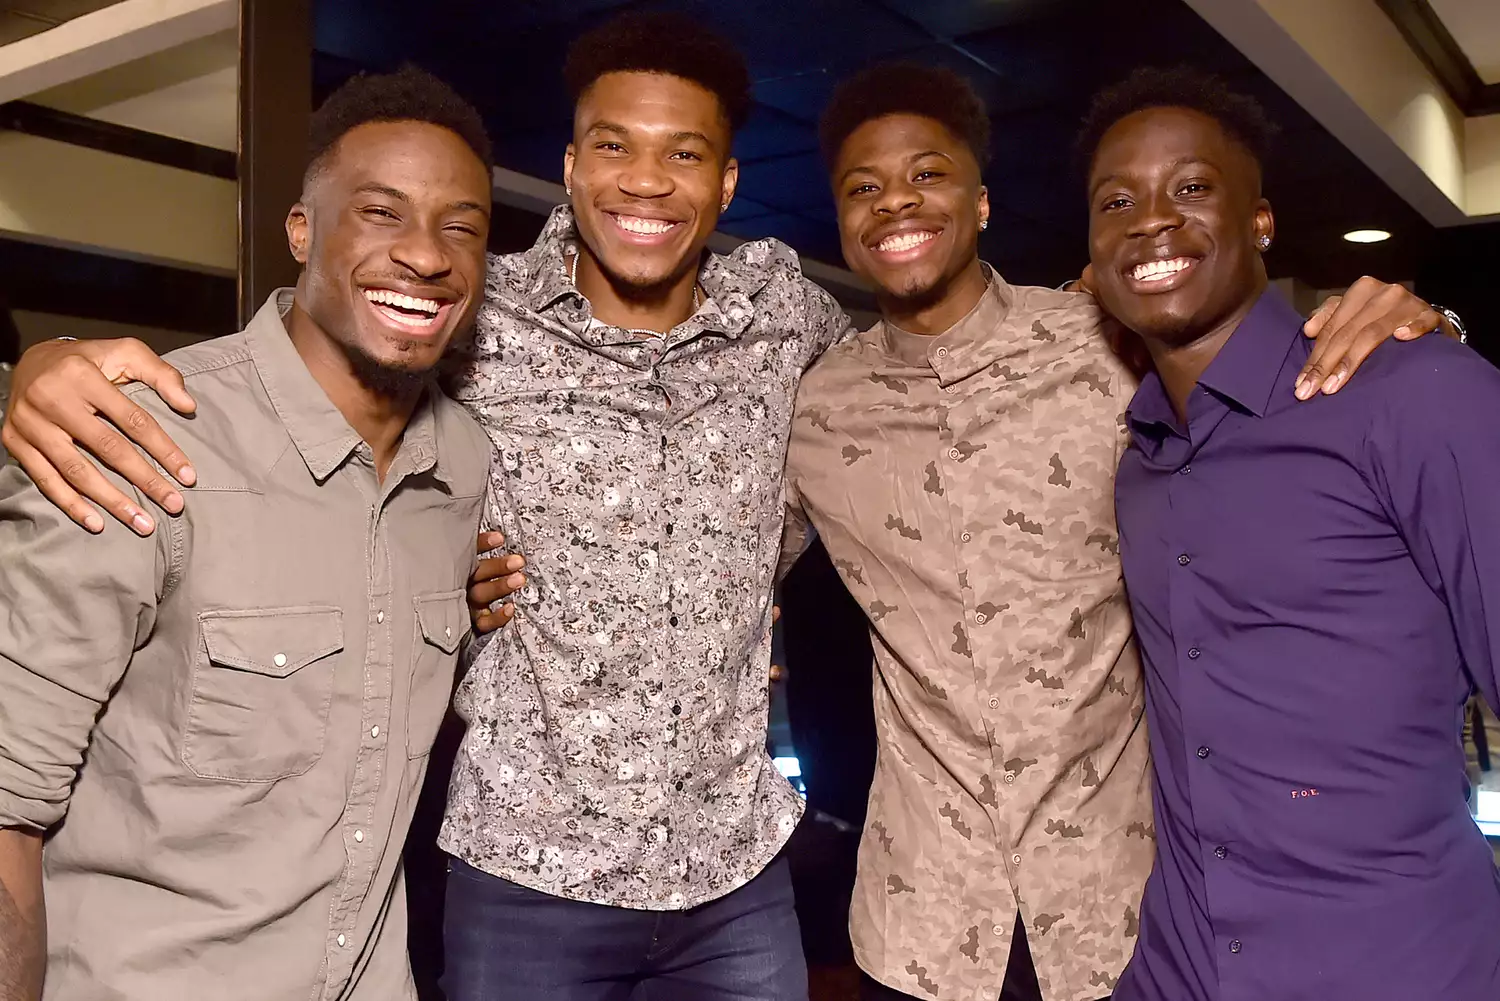 Thanasis Antetokounmpo, Giannis Antetokounmpo, Kostas Antetokounmpo and Alex Antetokounmpo attend the Rise press junket at The Hollywood Roosevelt in Los Angeles, California on June 21, 2022.